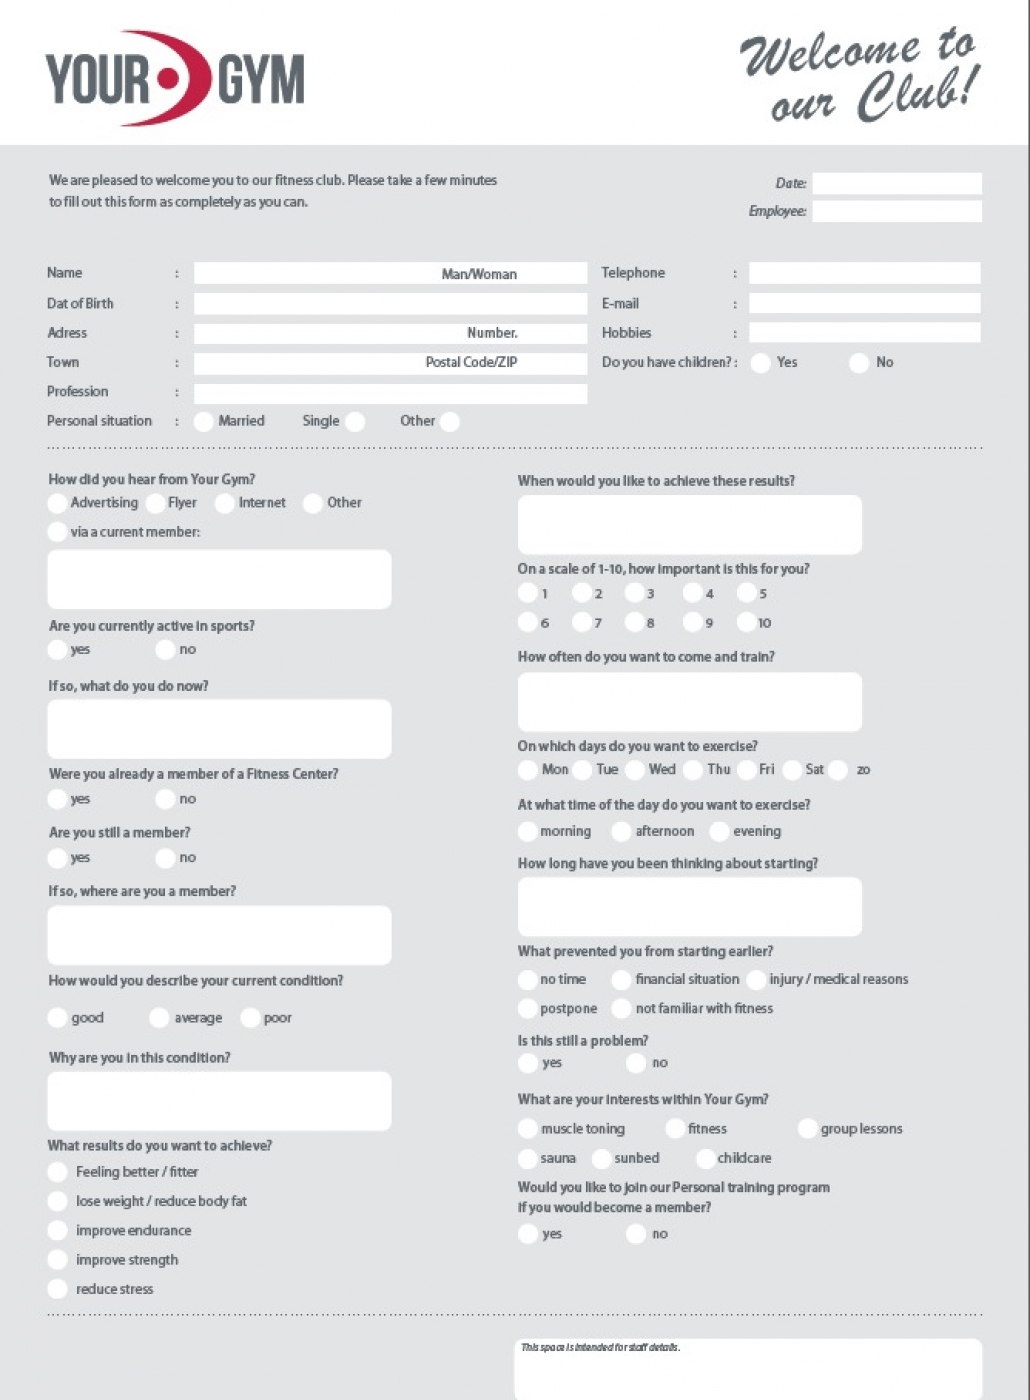 A detailed welcome form for new fitness club members - InDesign